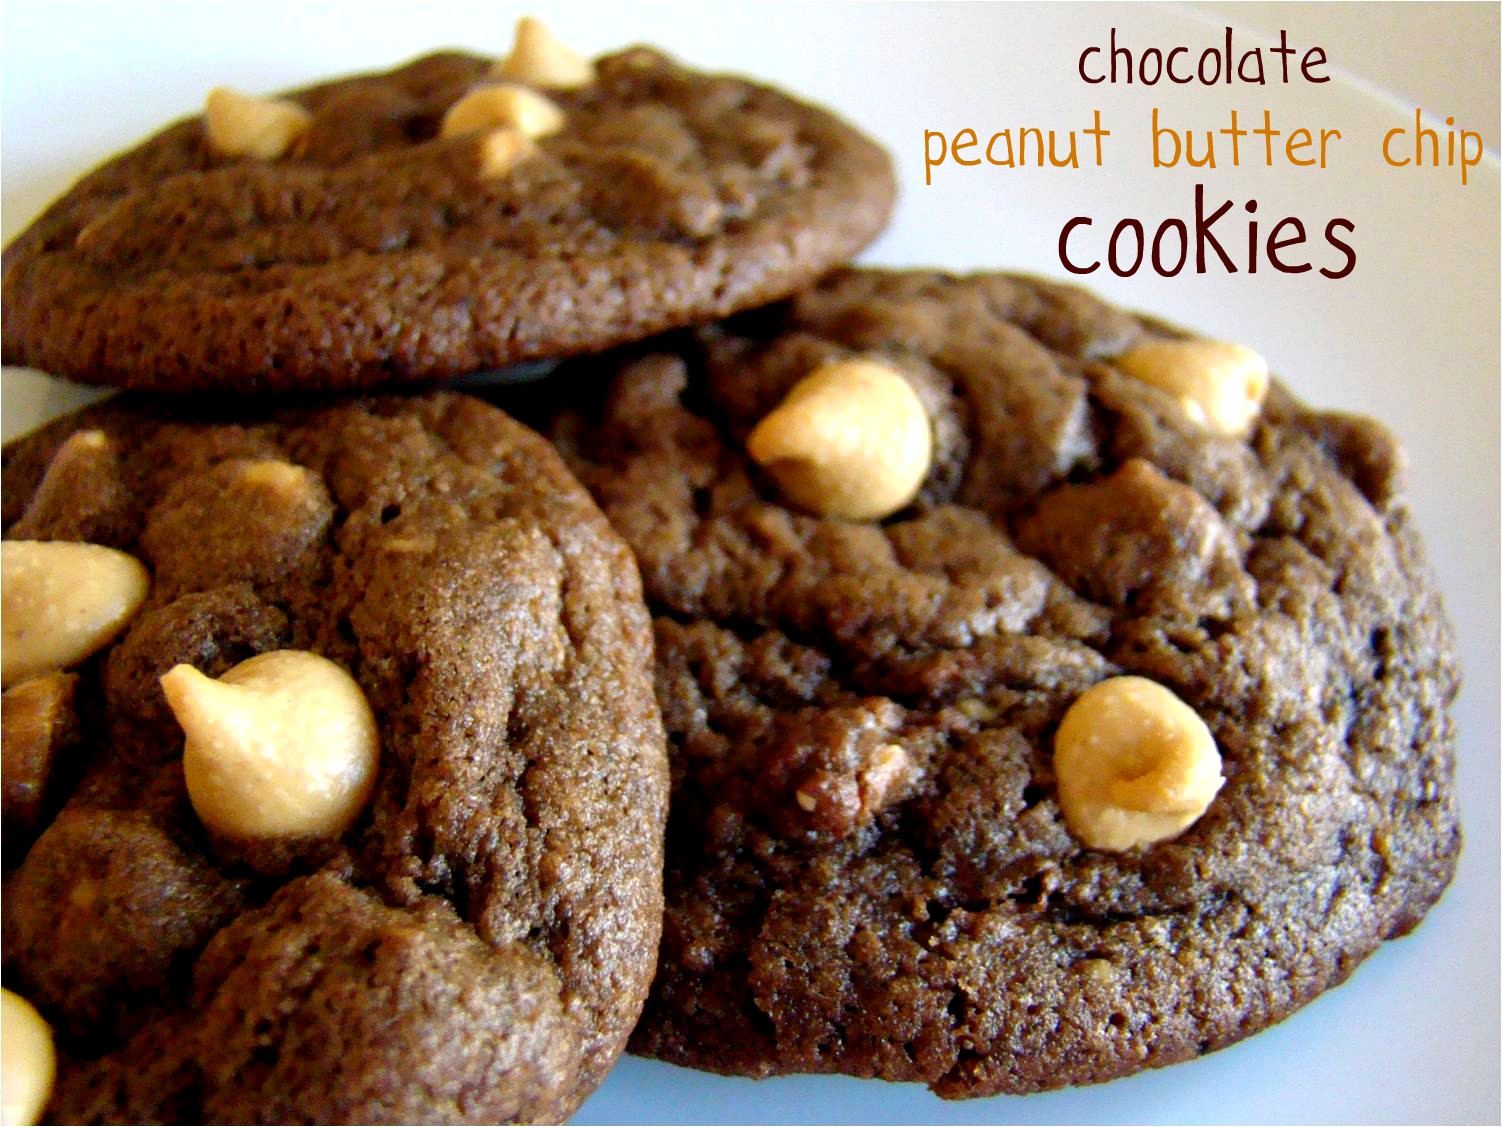 Cocoa Peanut Butter Cookies
 Family Feedbag Chocolate peanut butter chip cookies